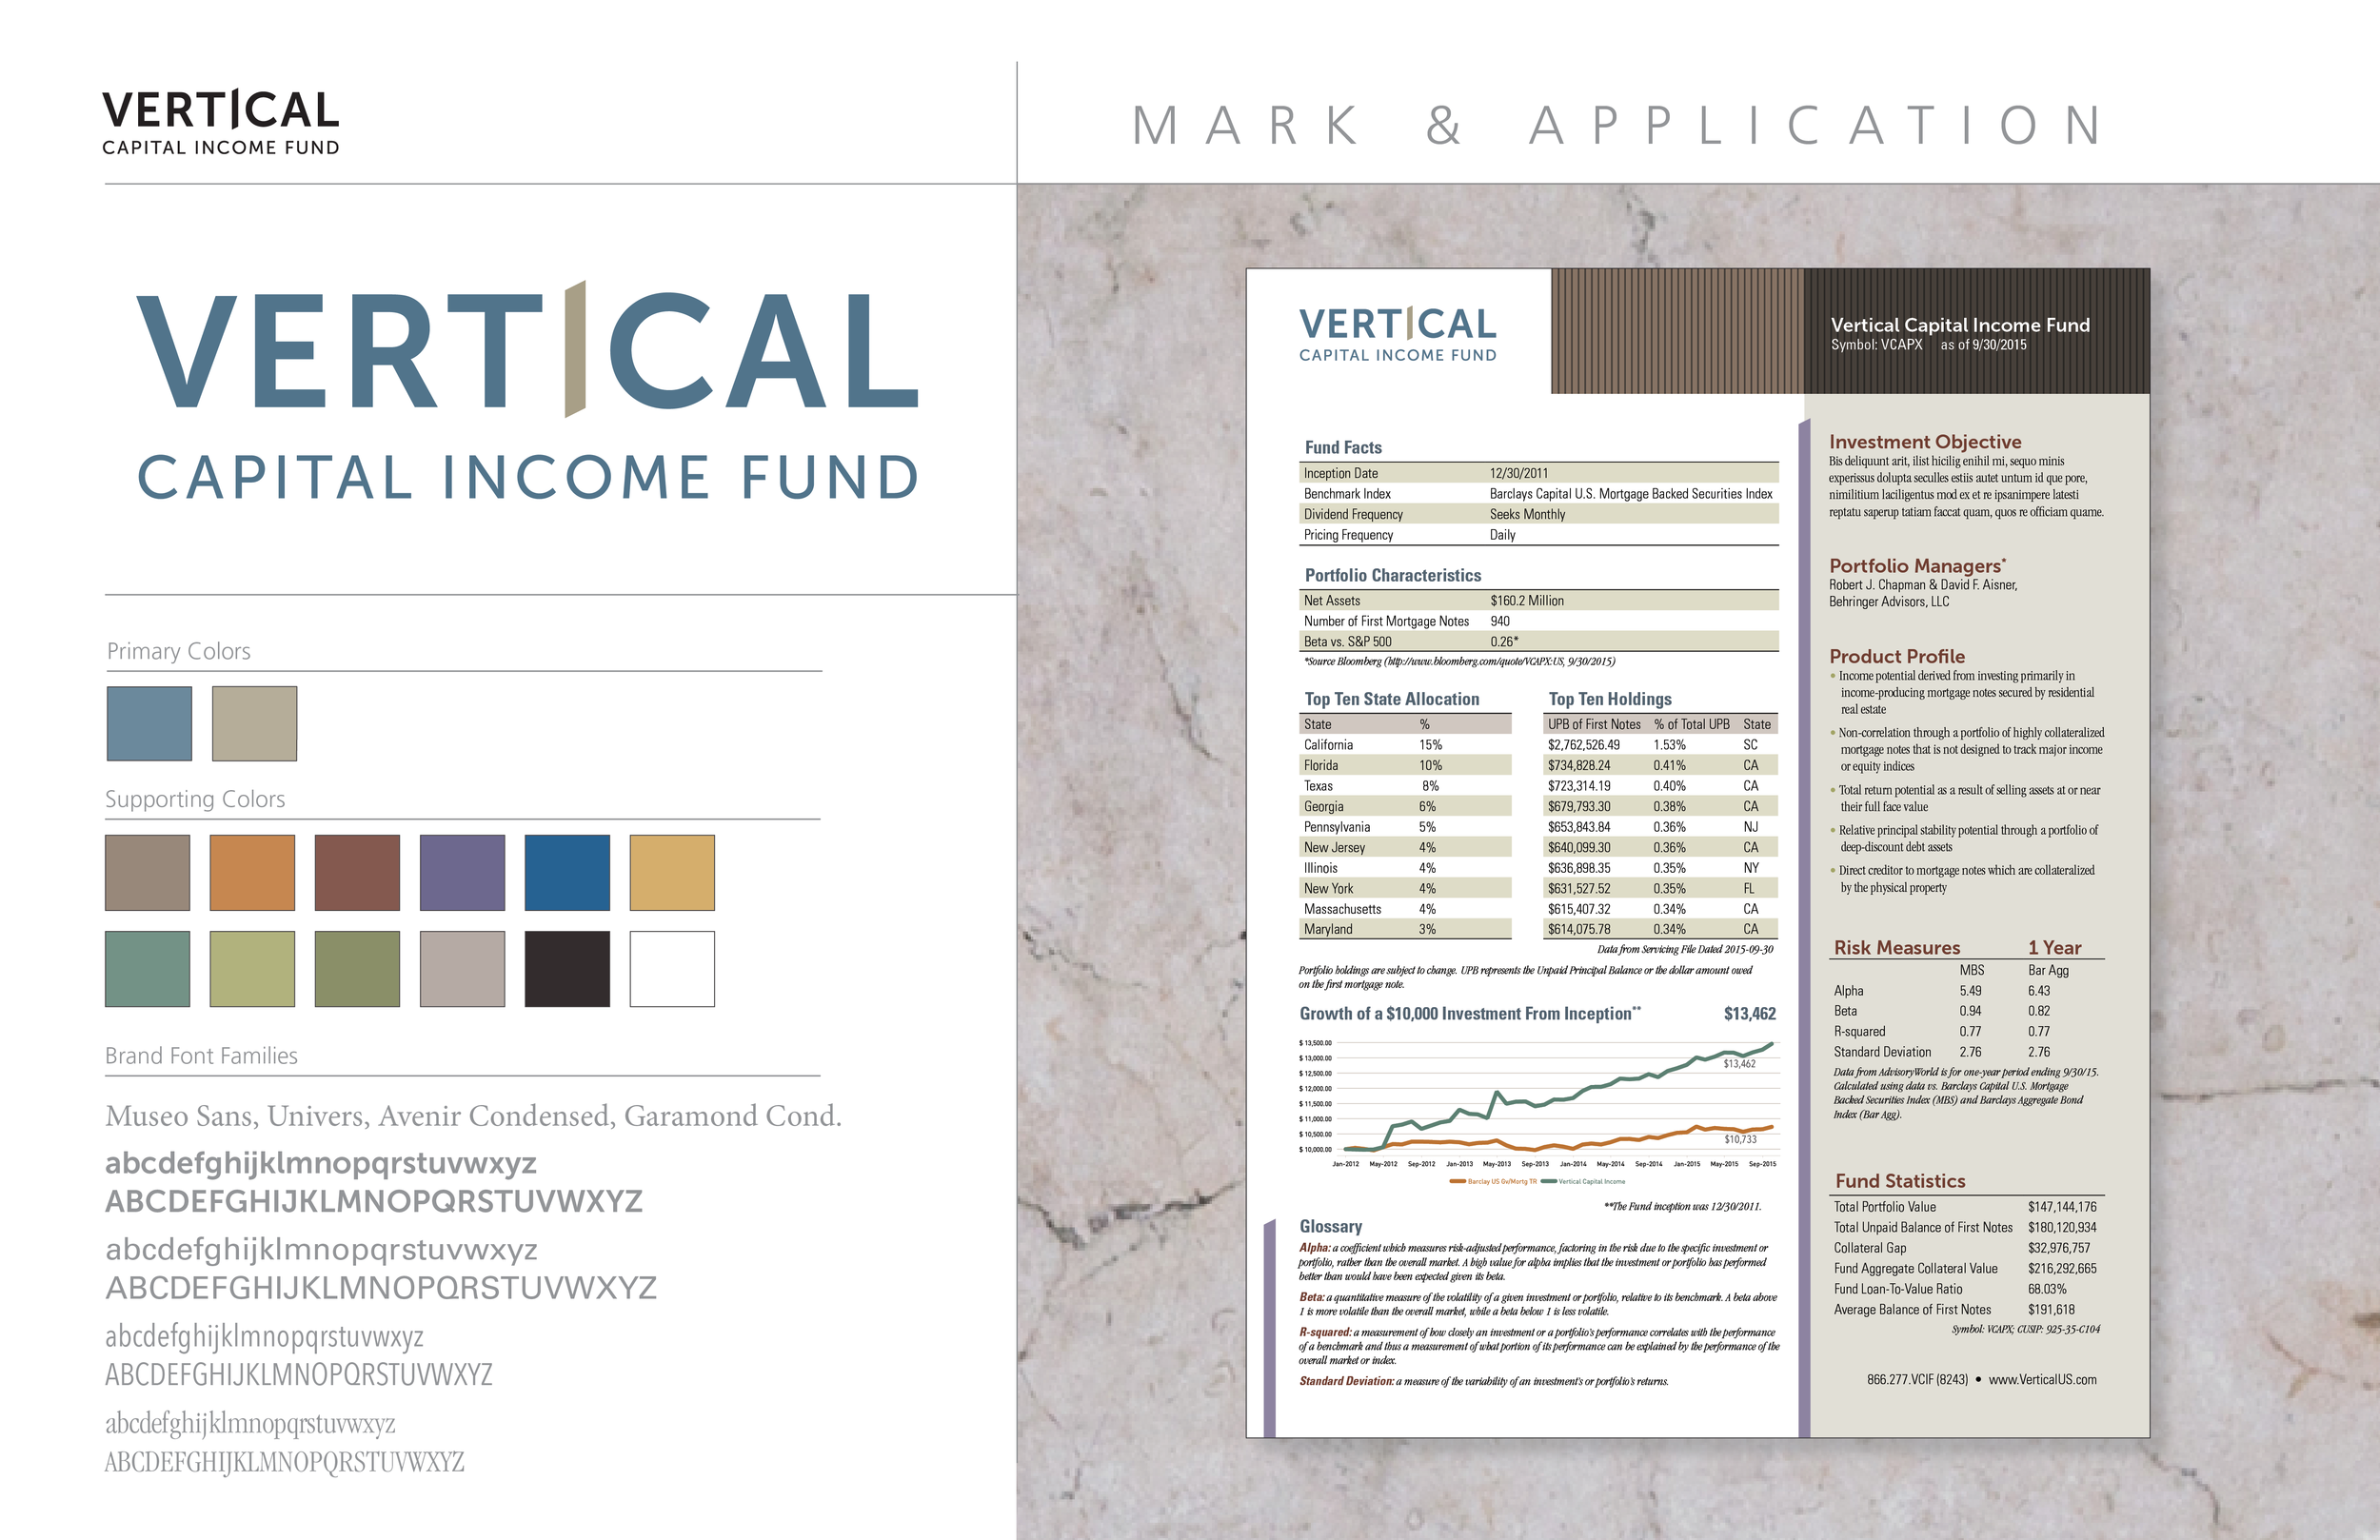 Vertical Capital Income Fund